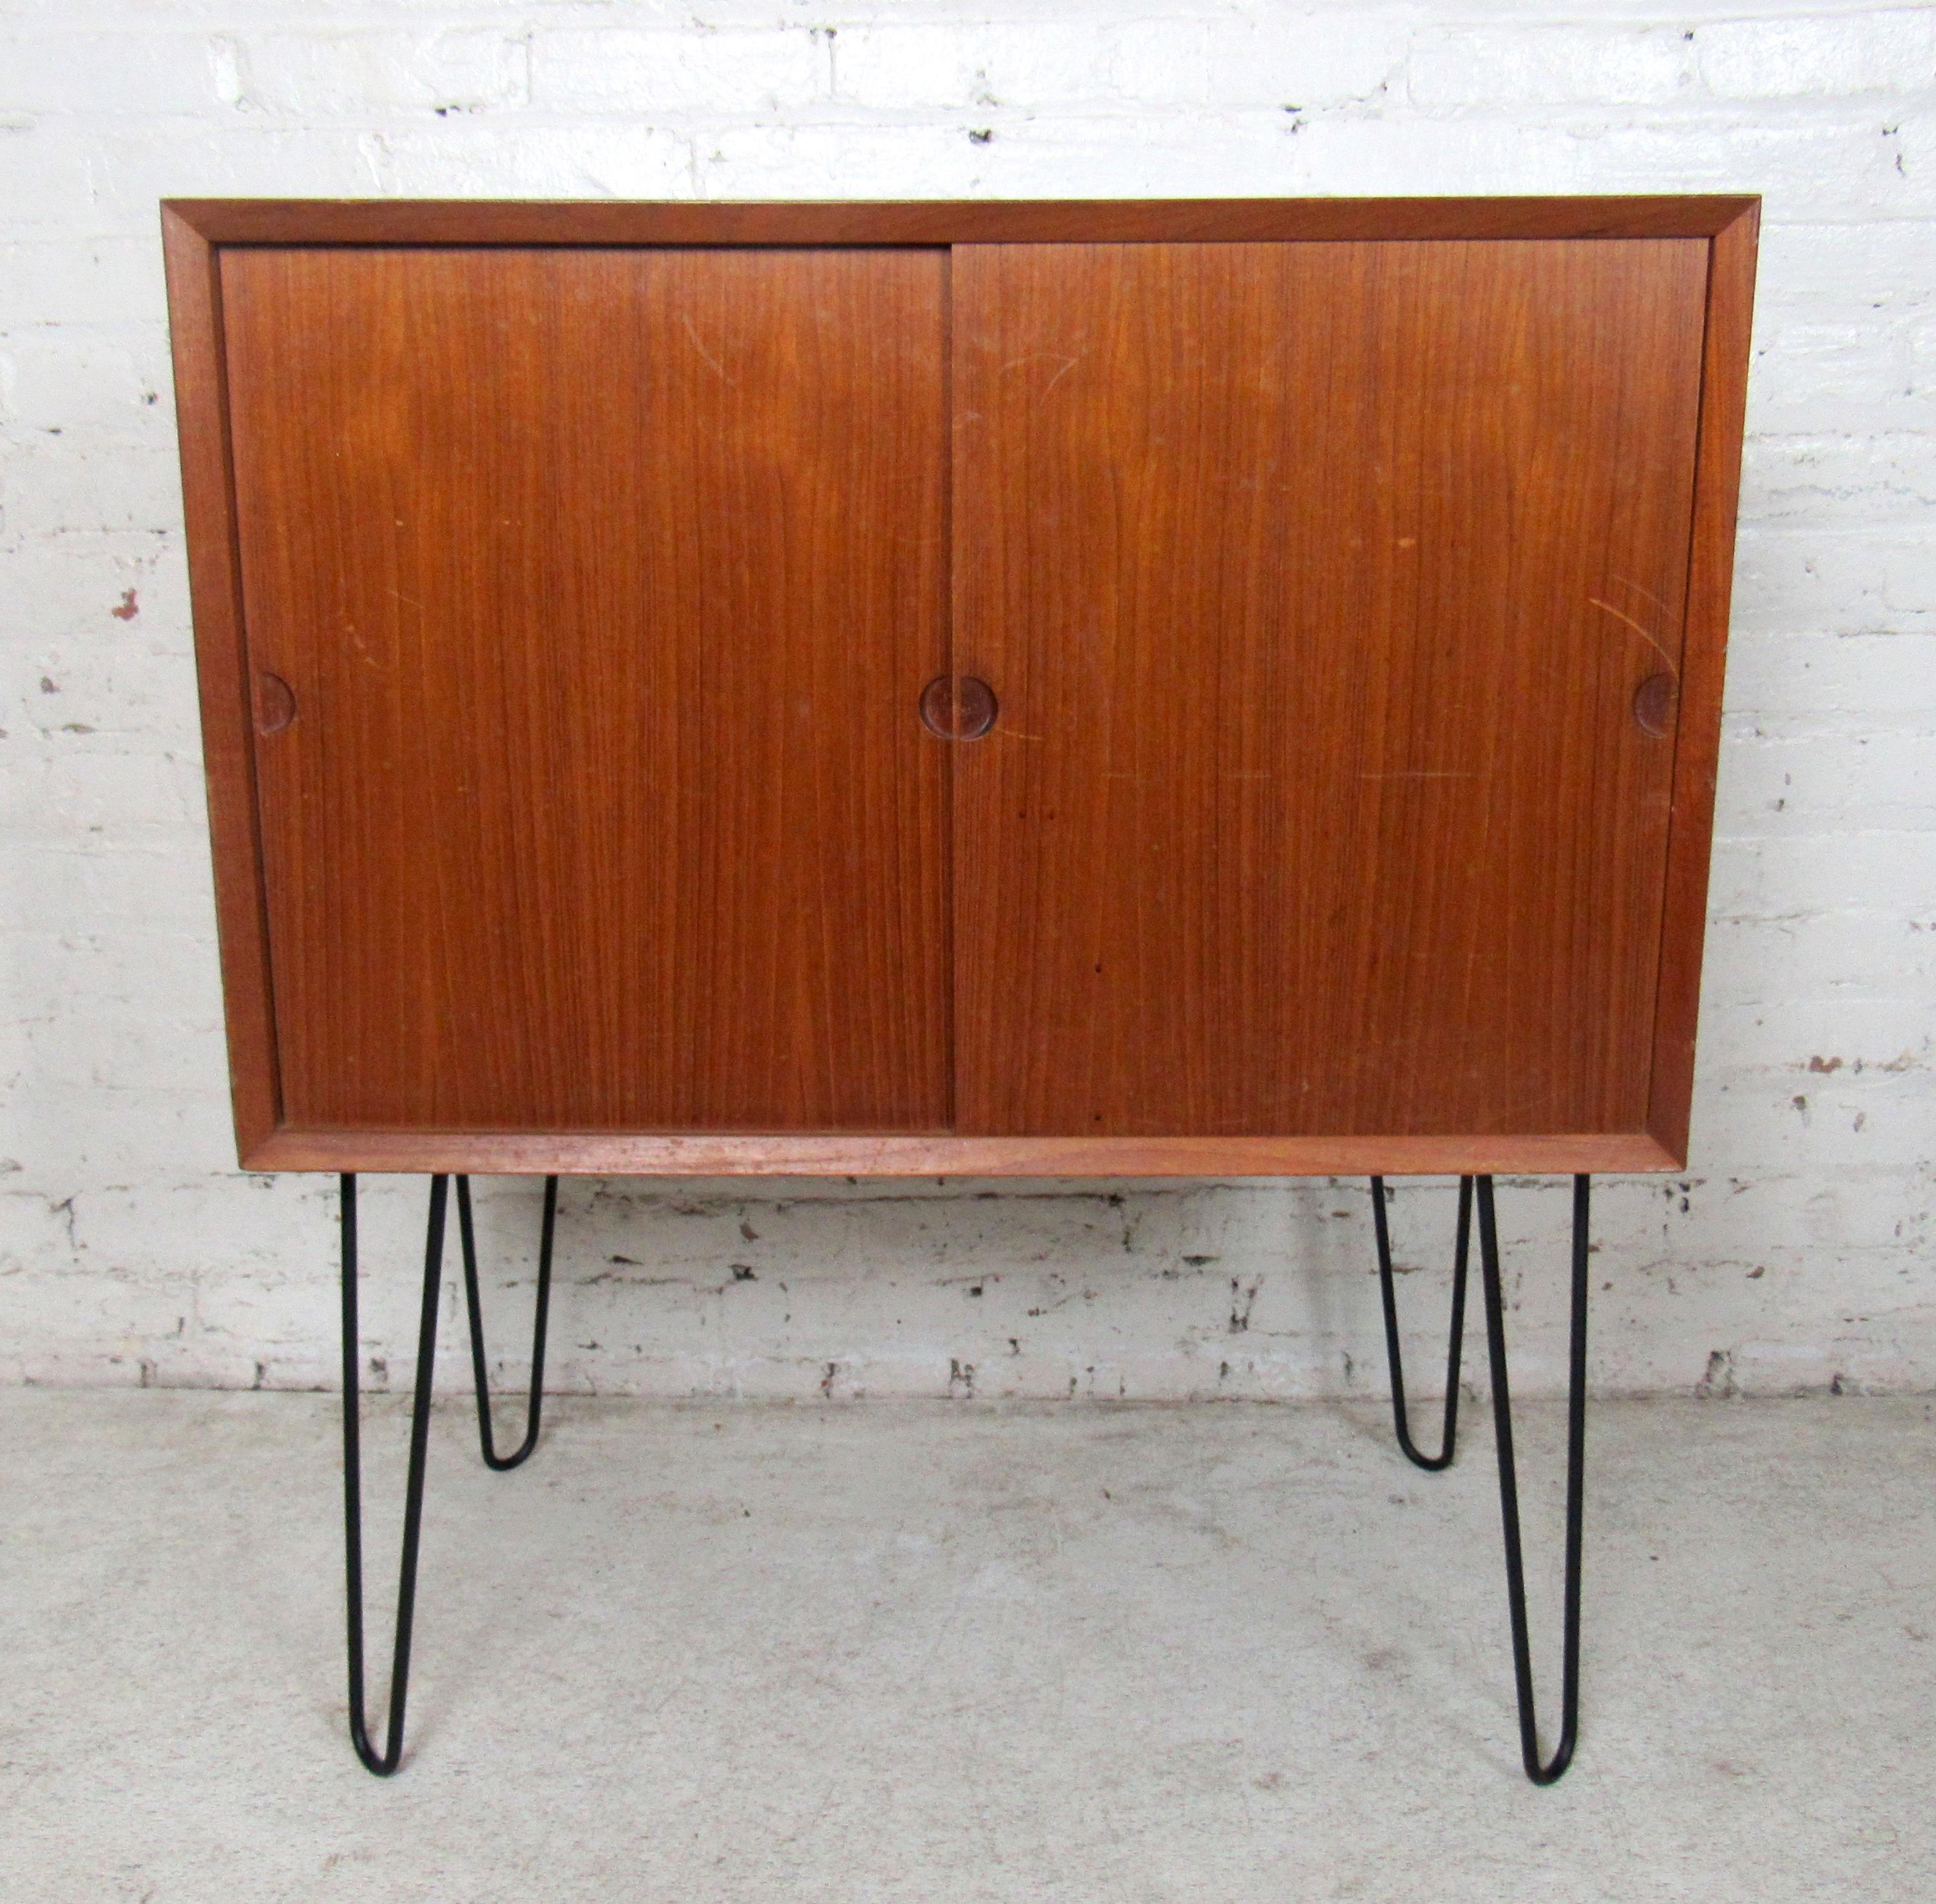 Vintage modern Danish teak cabinet featuring sliding doors, spacious storage space with one drawer on each side, on a set of hairpin legs.

-(Please confirm item location - NY or NJ - with dealer).